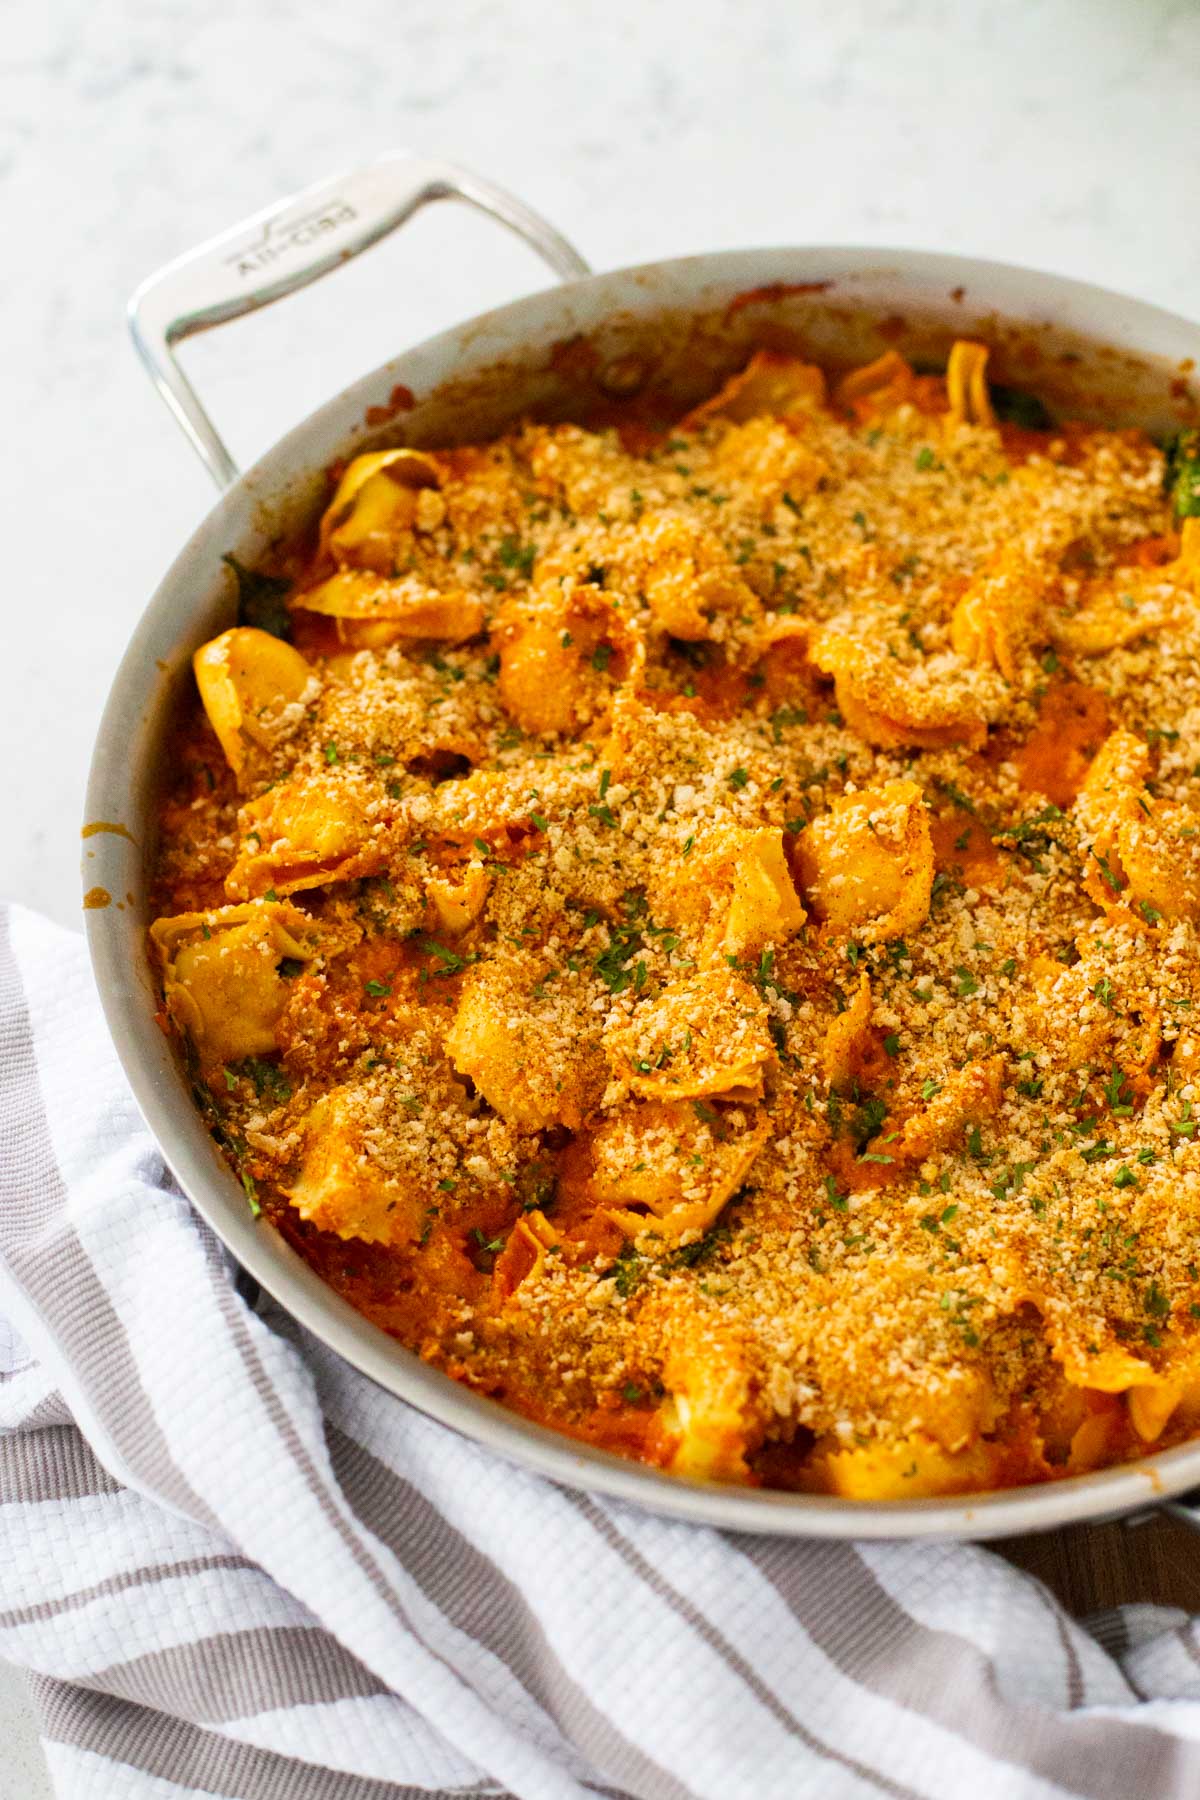 The finished skillet filled with baked tortellini has crispy bread crumbs on top.